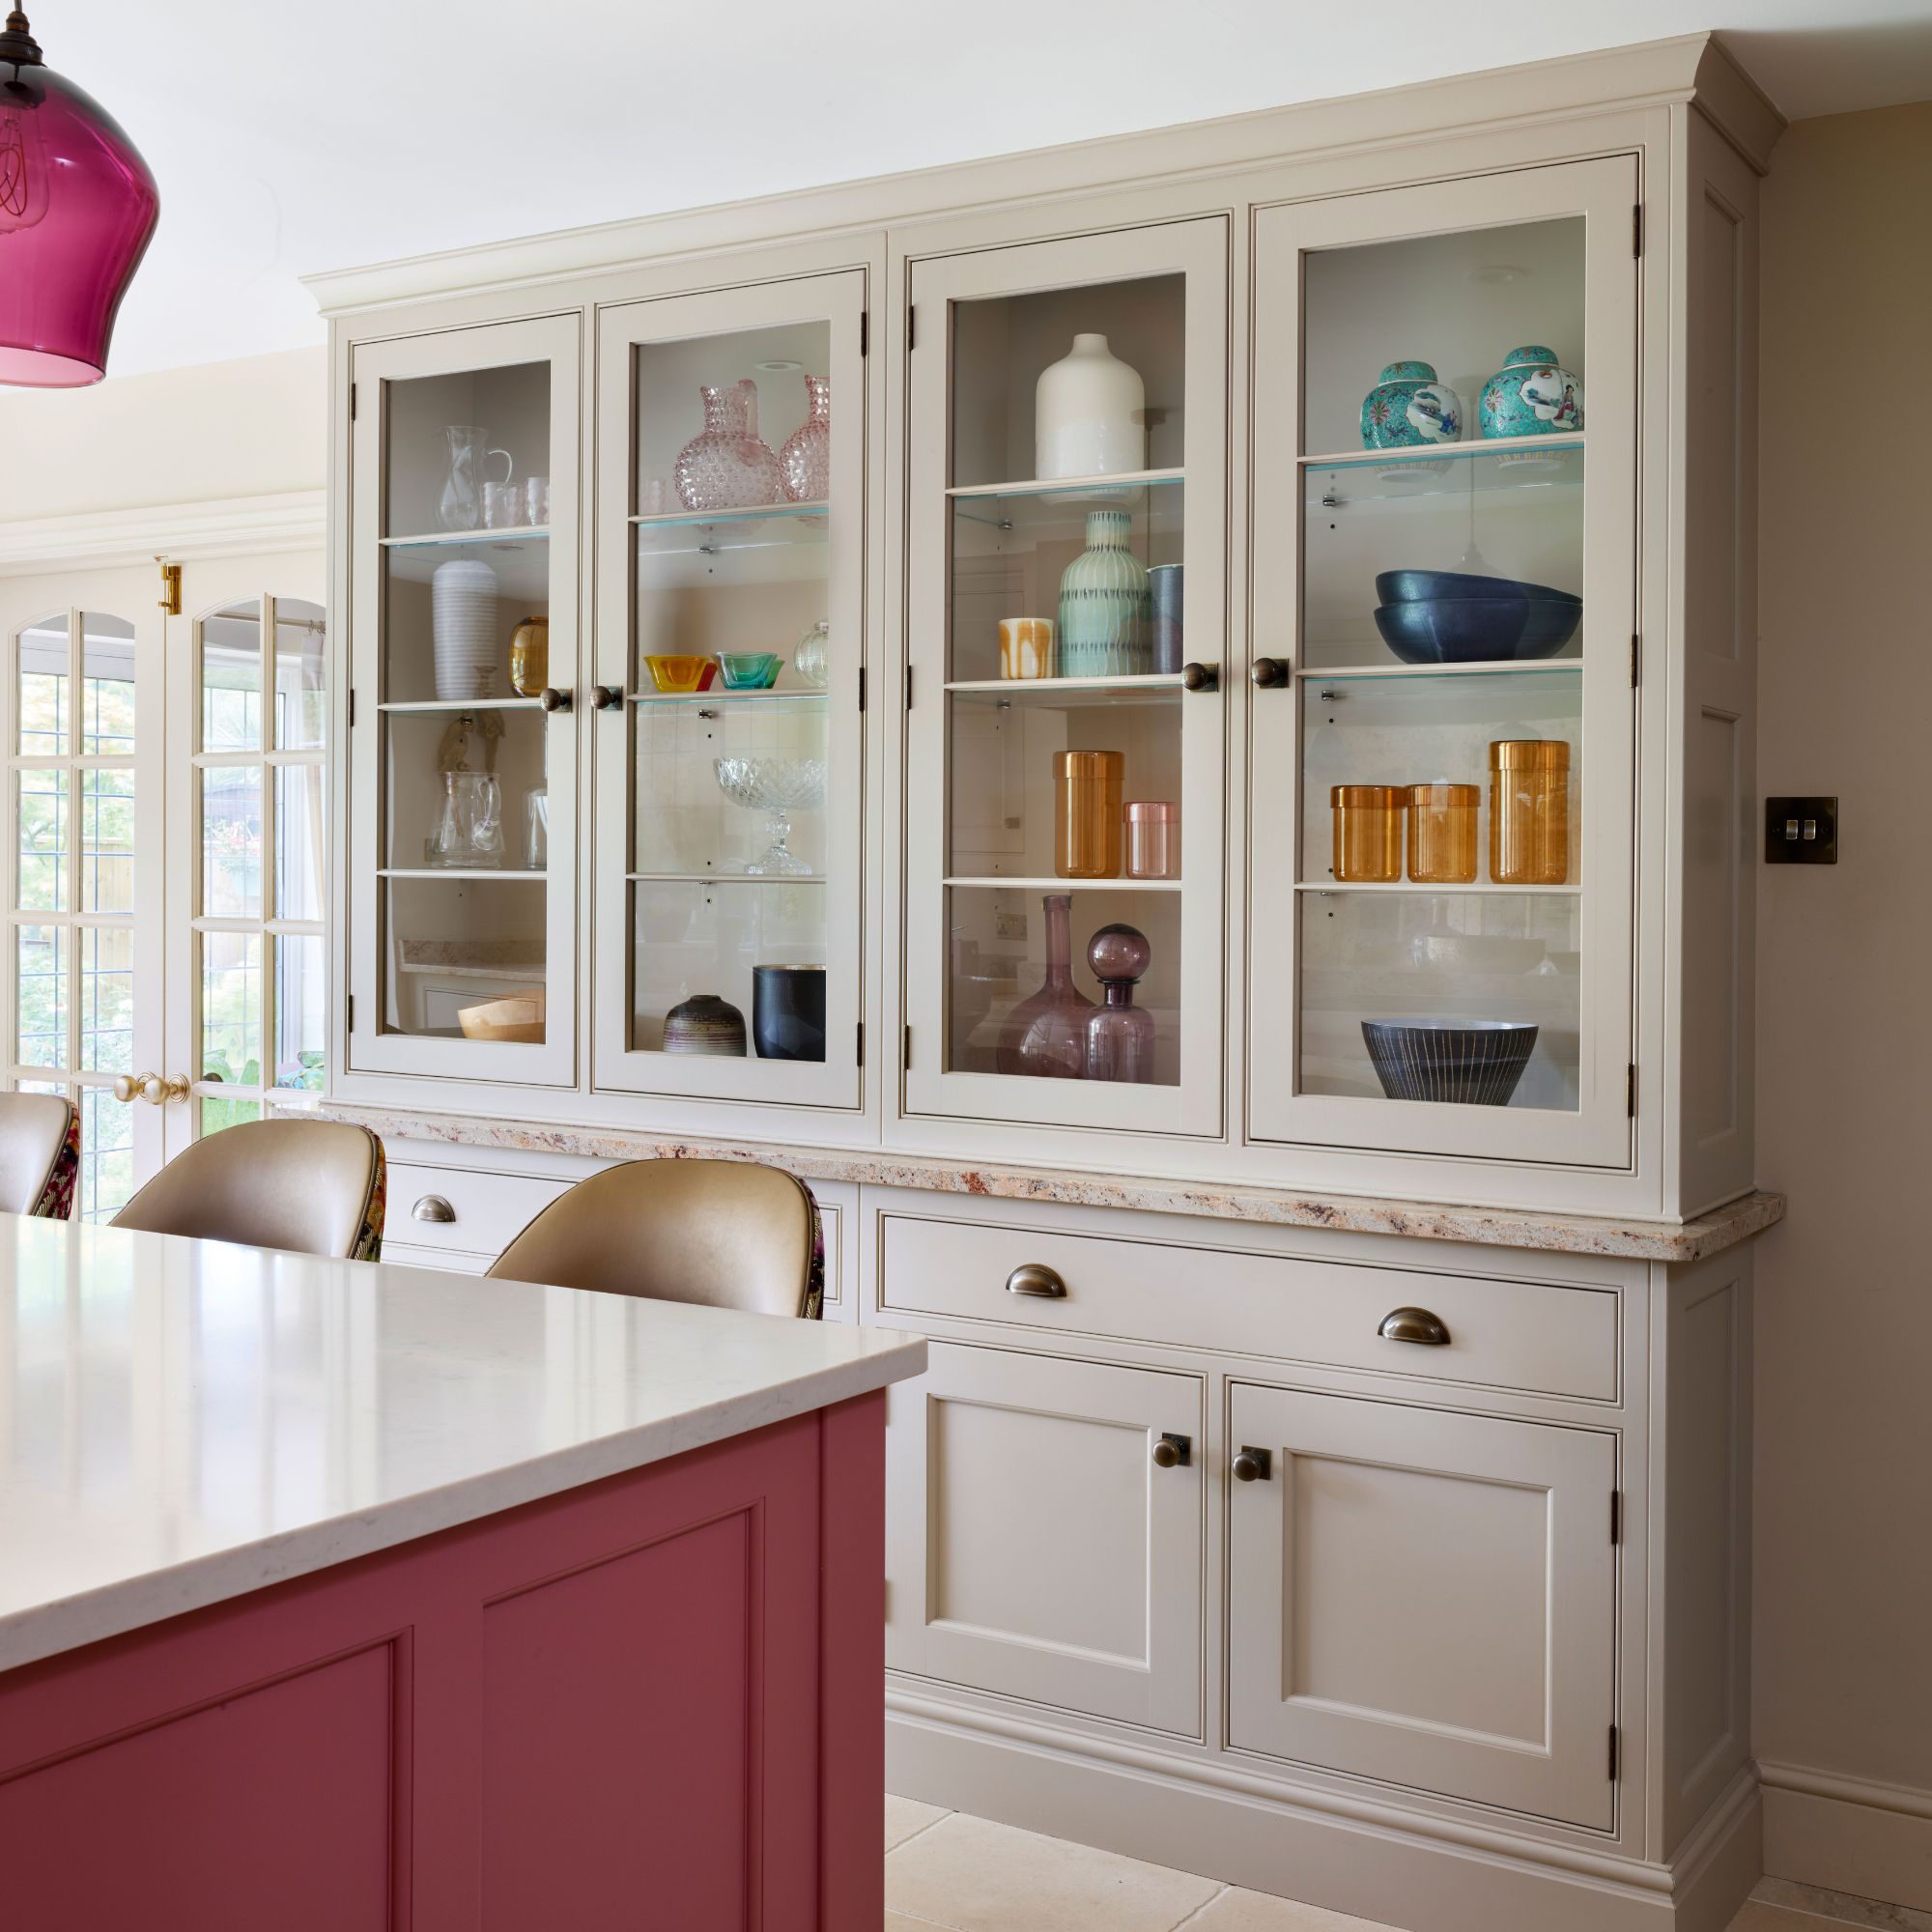 kitchen with cream cabinetry and pink island and mirrored splashback